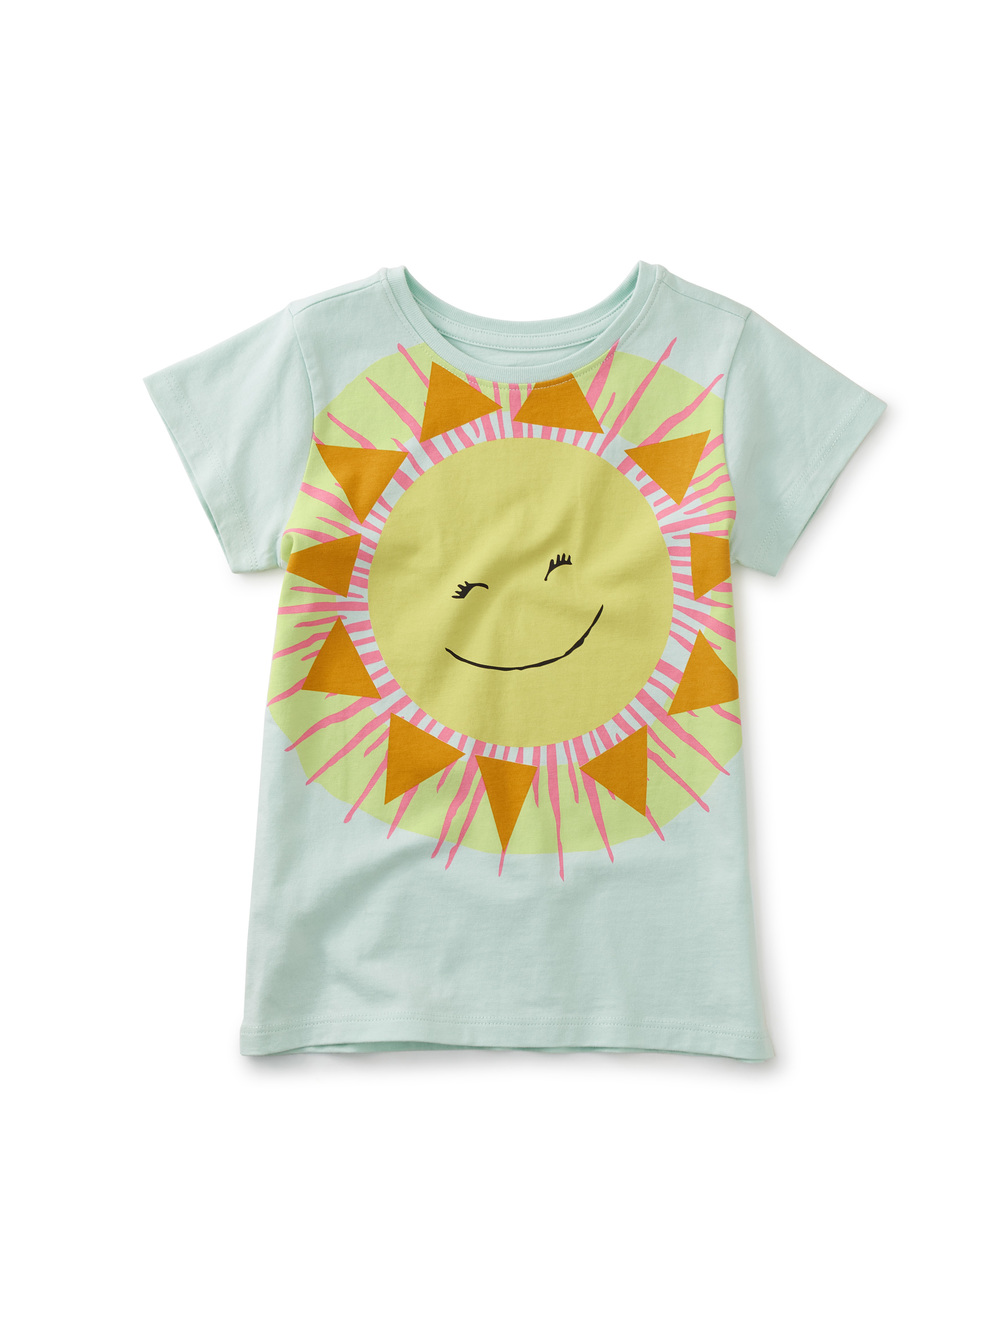 Mostly Sunny Graphic Tee